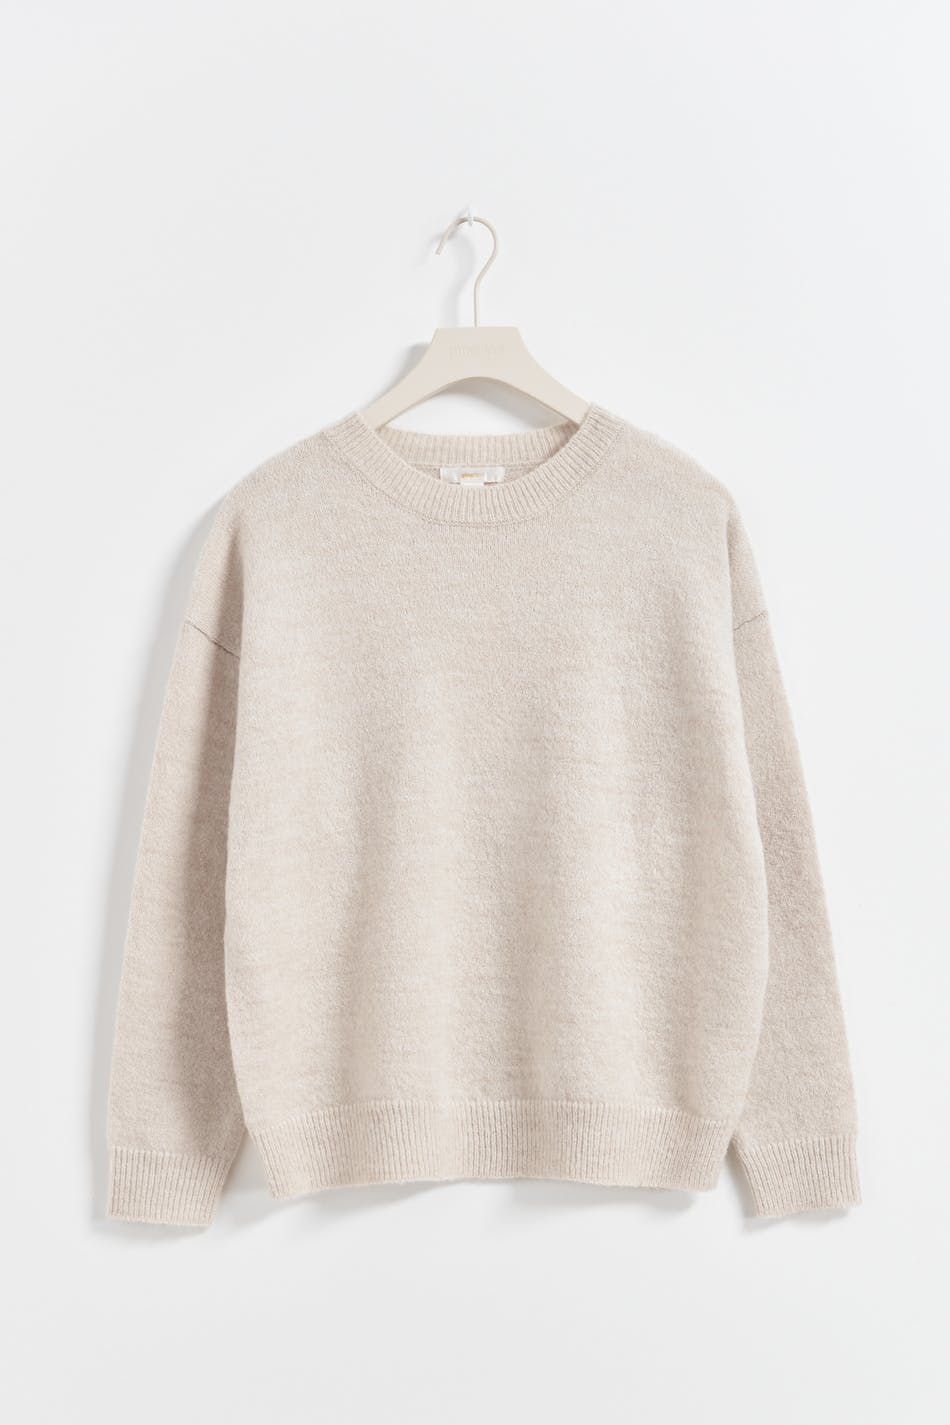 Gina Tricot - Y basic knitted sweater - stickade tröjor - Beige - 170 - Female